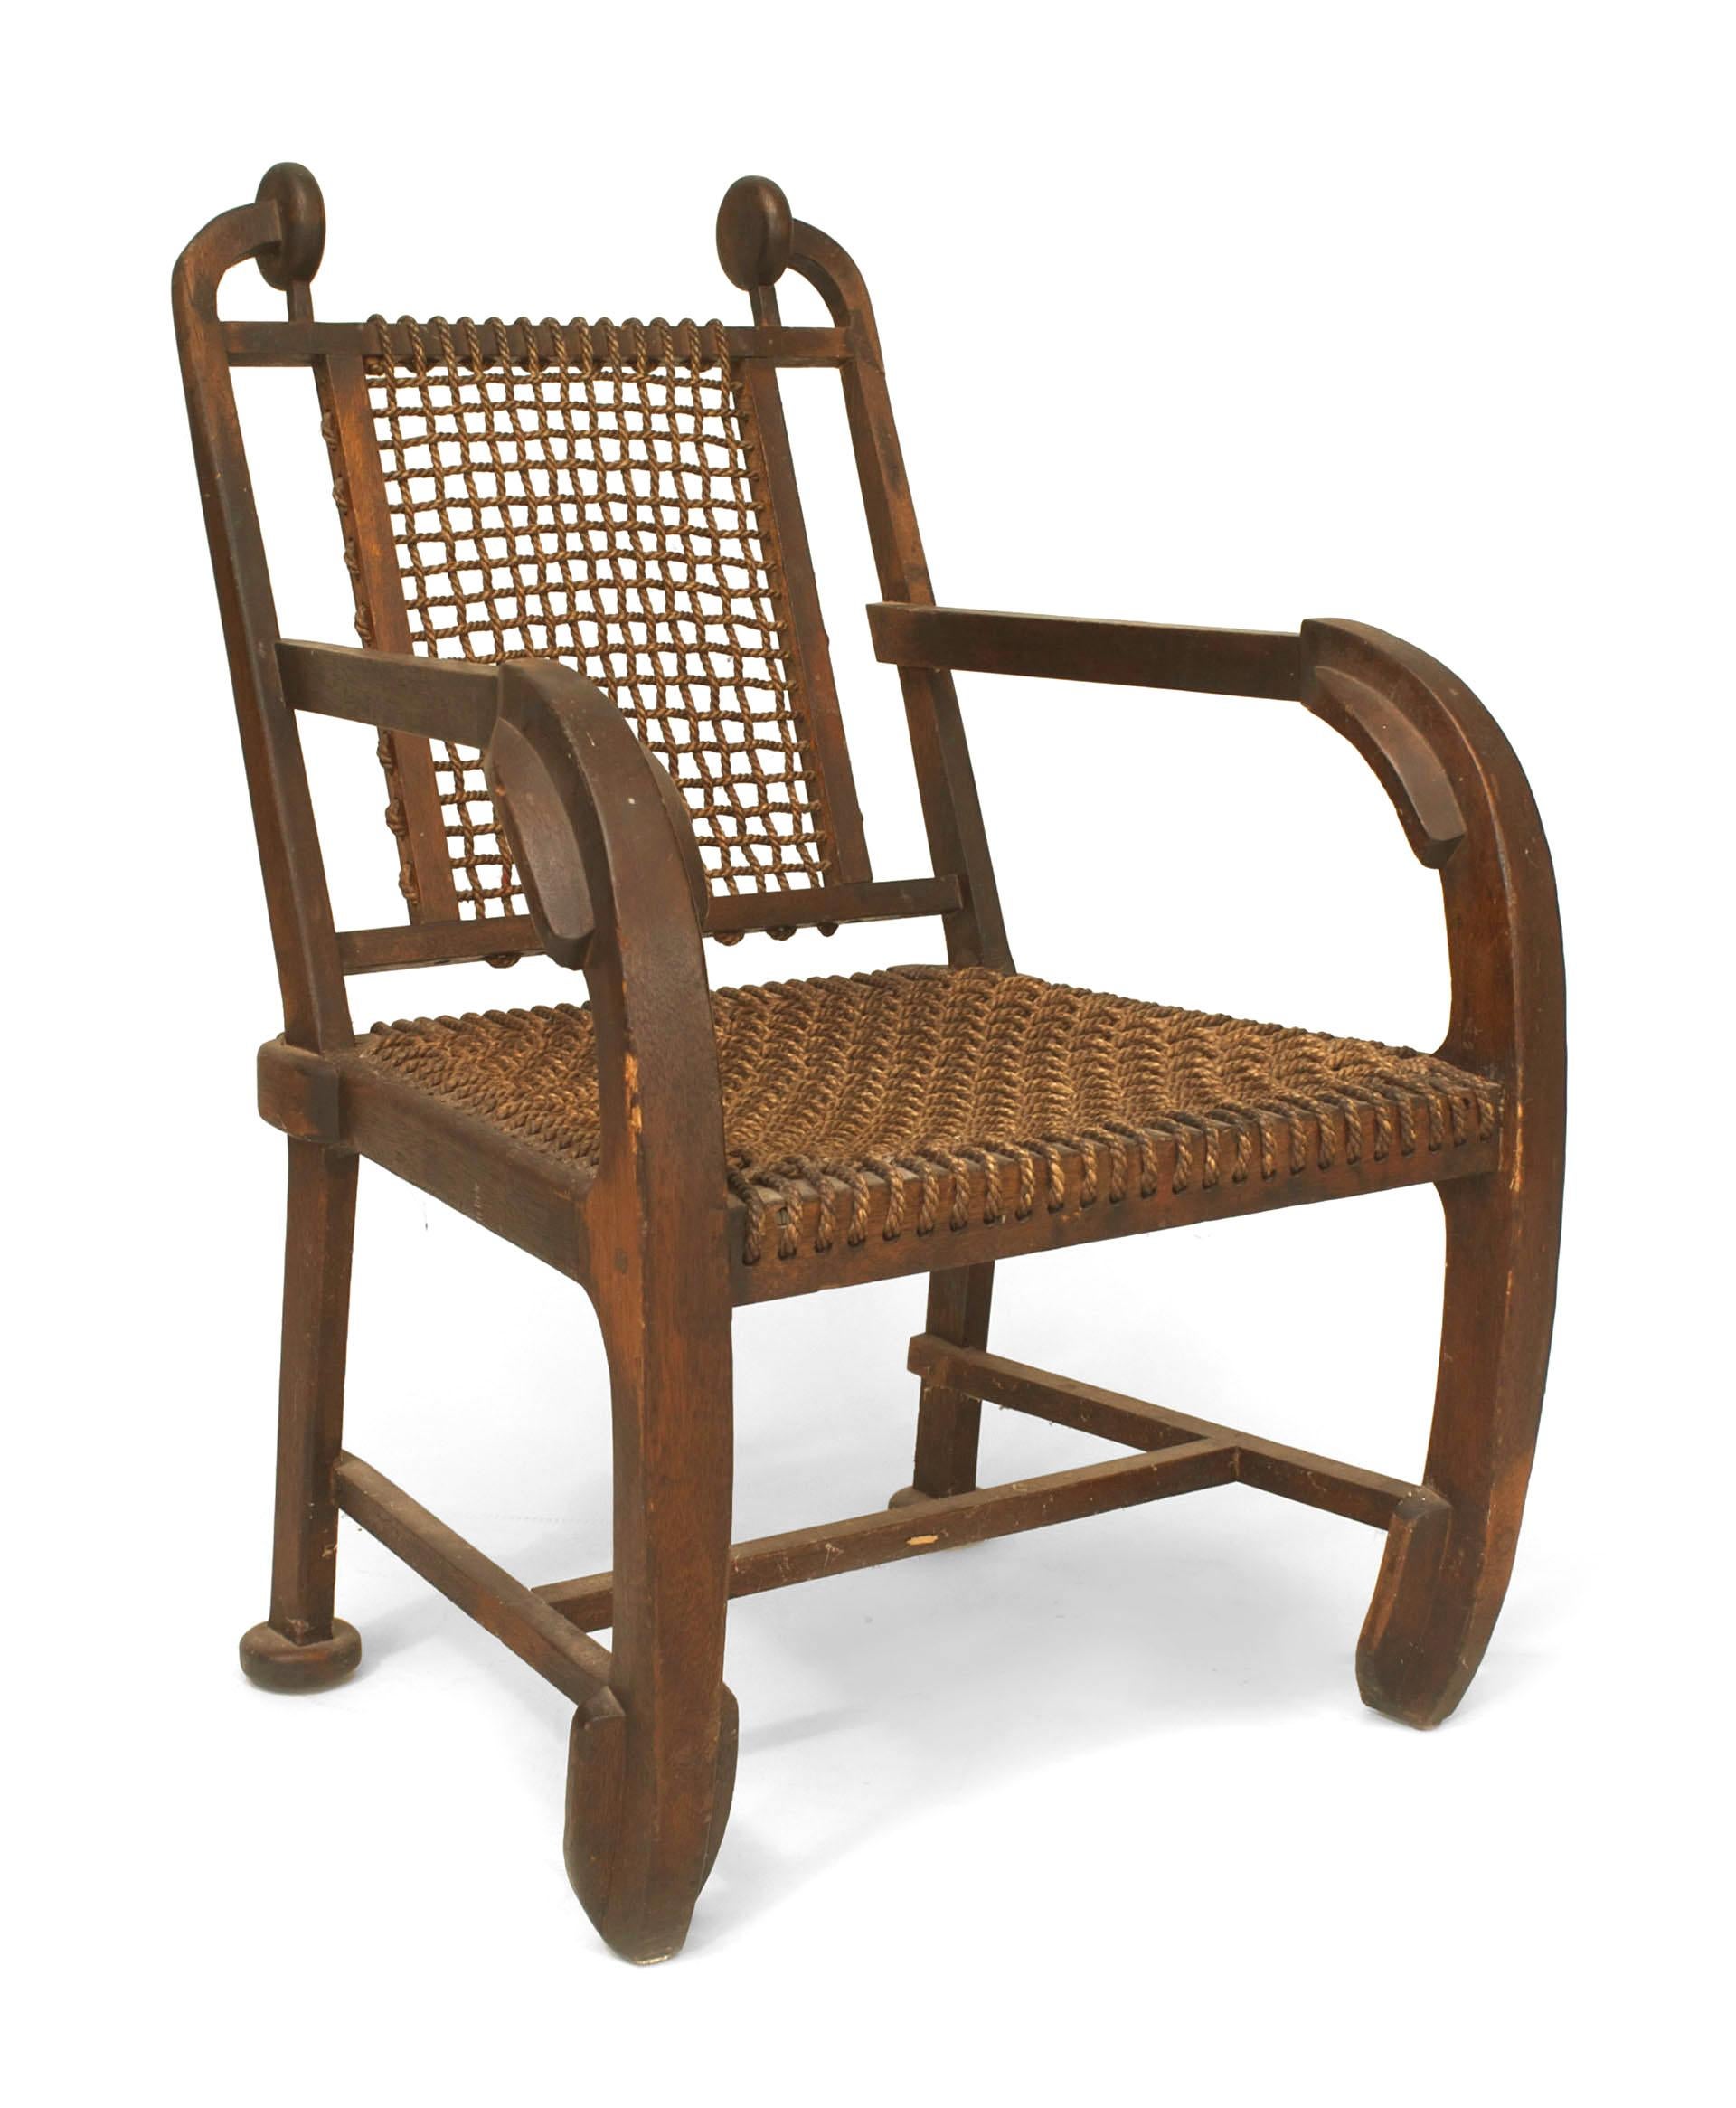 English (possibly Scottish) Arts & Crafts rustic design dark stained oak arm chair with nautical paddle form arms and legs with a woven rope seat and back.
